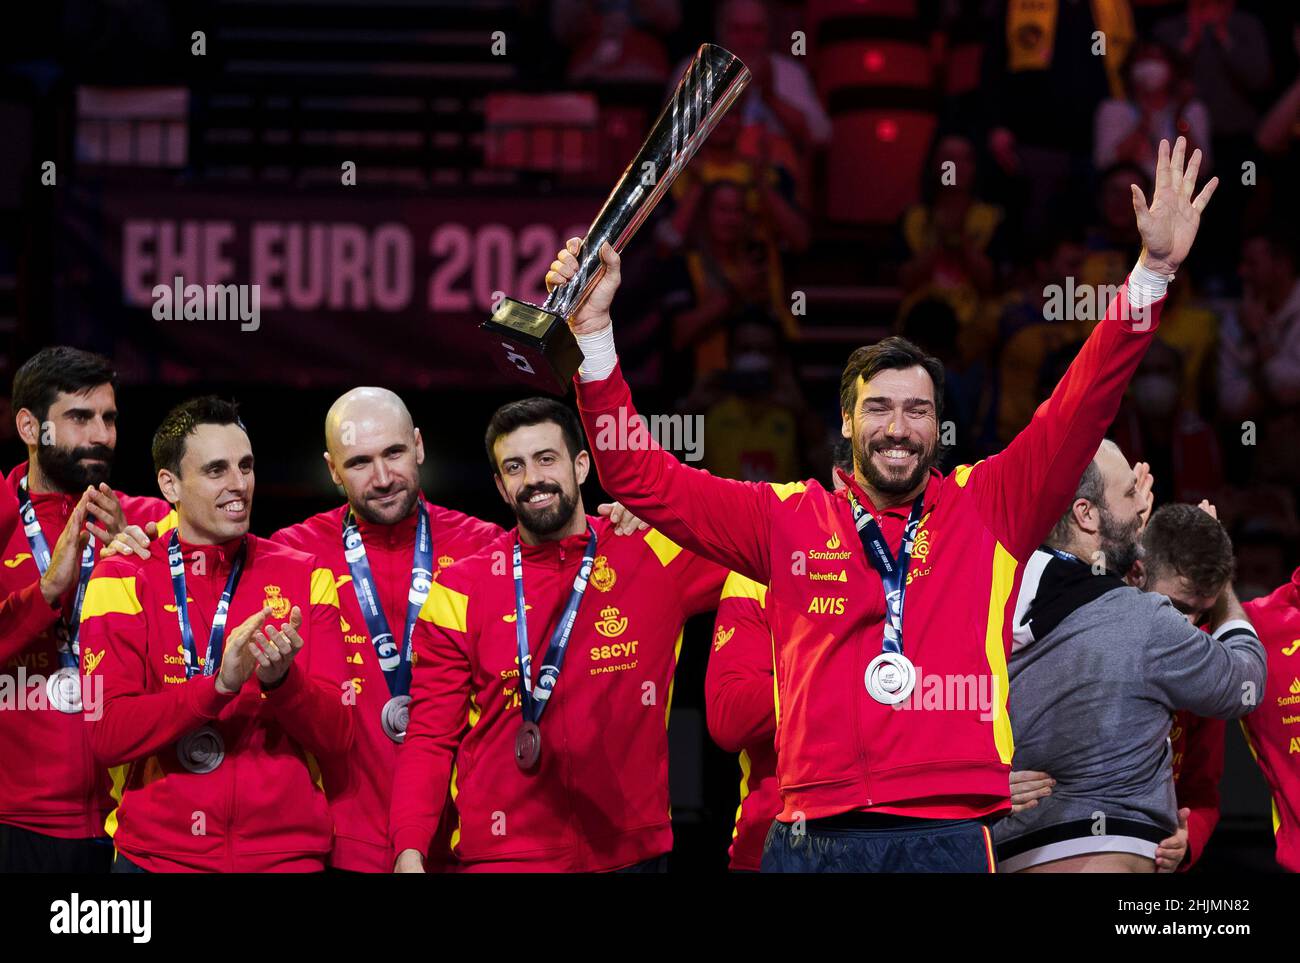 Budapest, Hungary, 30th January 2022. Gedeon Guardiola Villaplana of Spain celebrates the second place with his teammates during the Men's EHF EURO 2022, Final Match match between Sweden v Spain in Budapest, Hungary. January 30, 2022. Credit: Nikola Krstic/Alamy Stock Photo